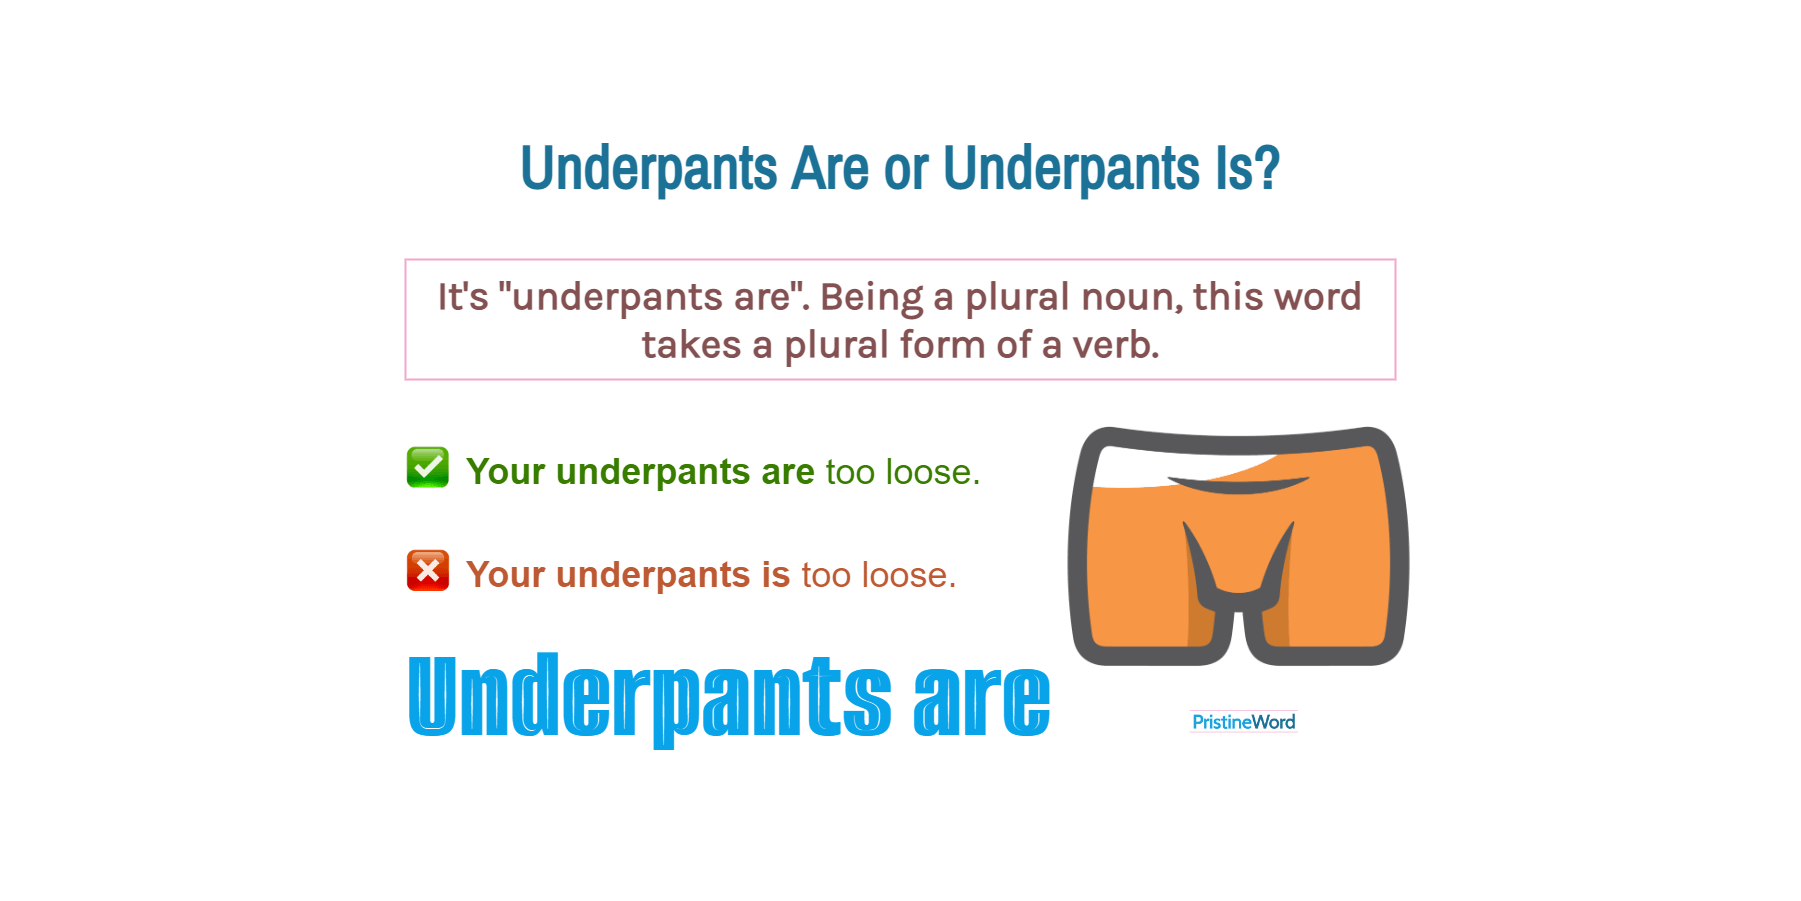 Underpants Are Or Underpants Is. Which Is Correct?